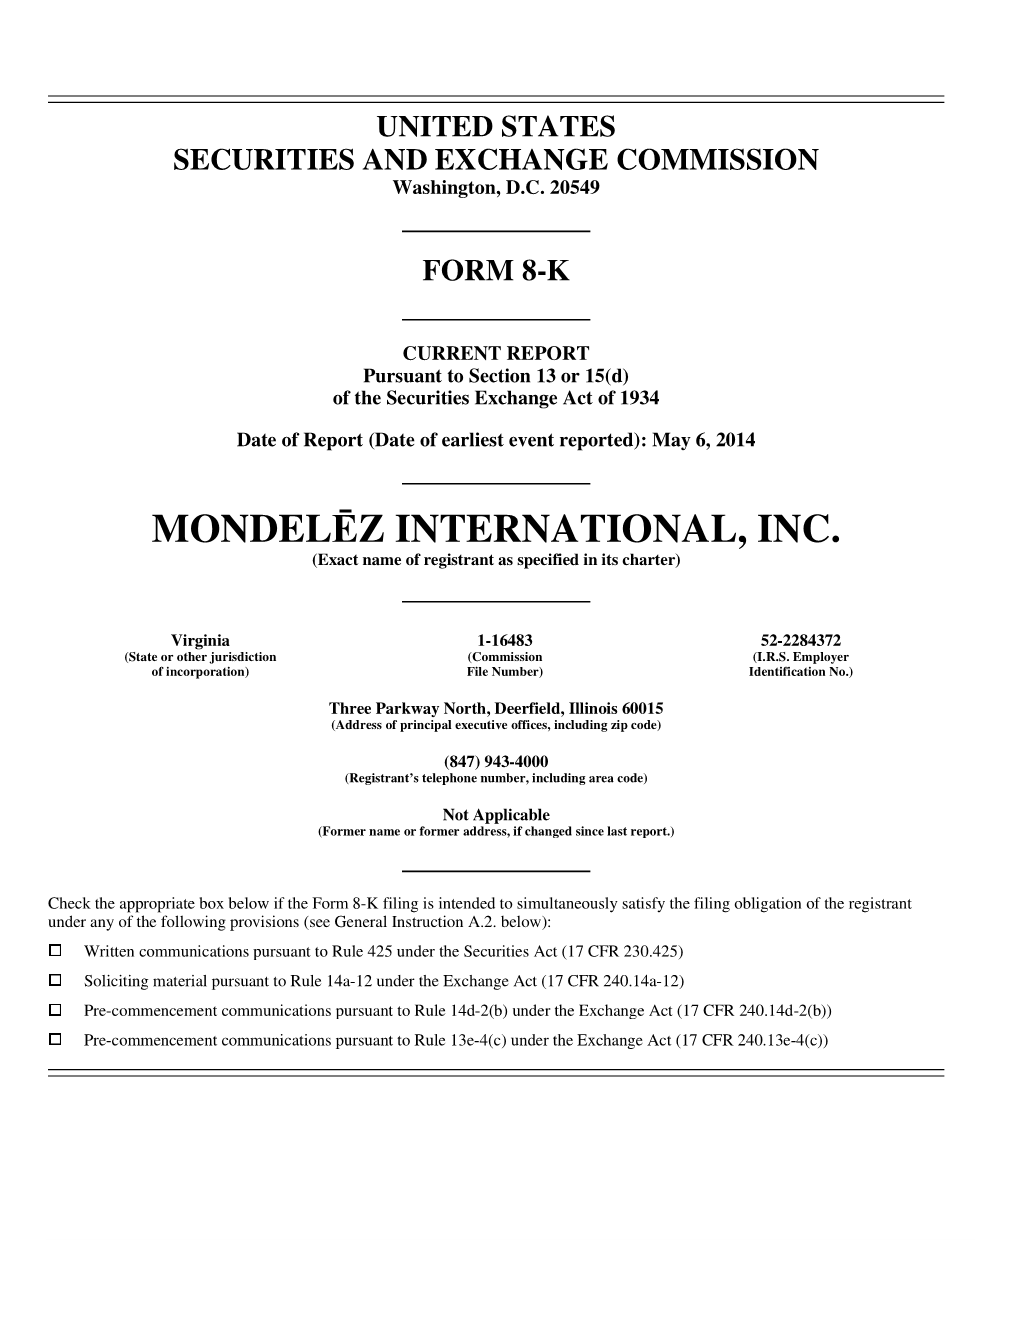 MONDELĒZ INTERNATIONAL, INC. (Exact Name of Registrant As Specified in Its Charter)